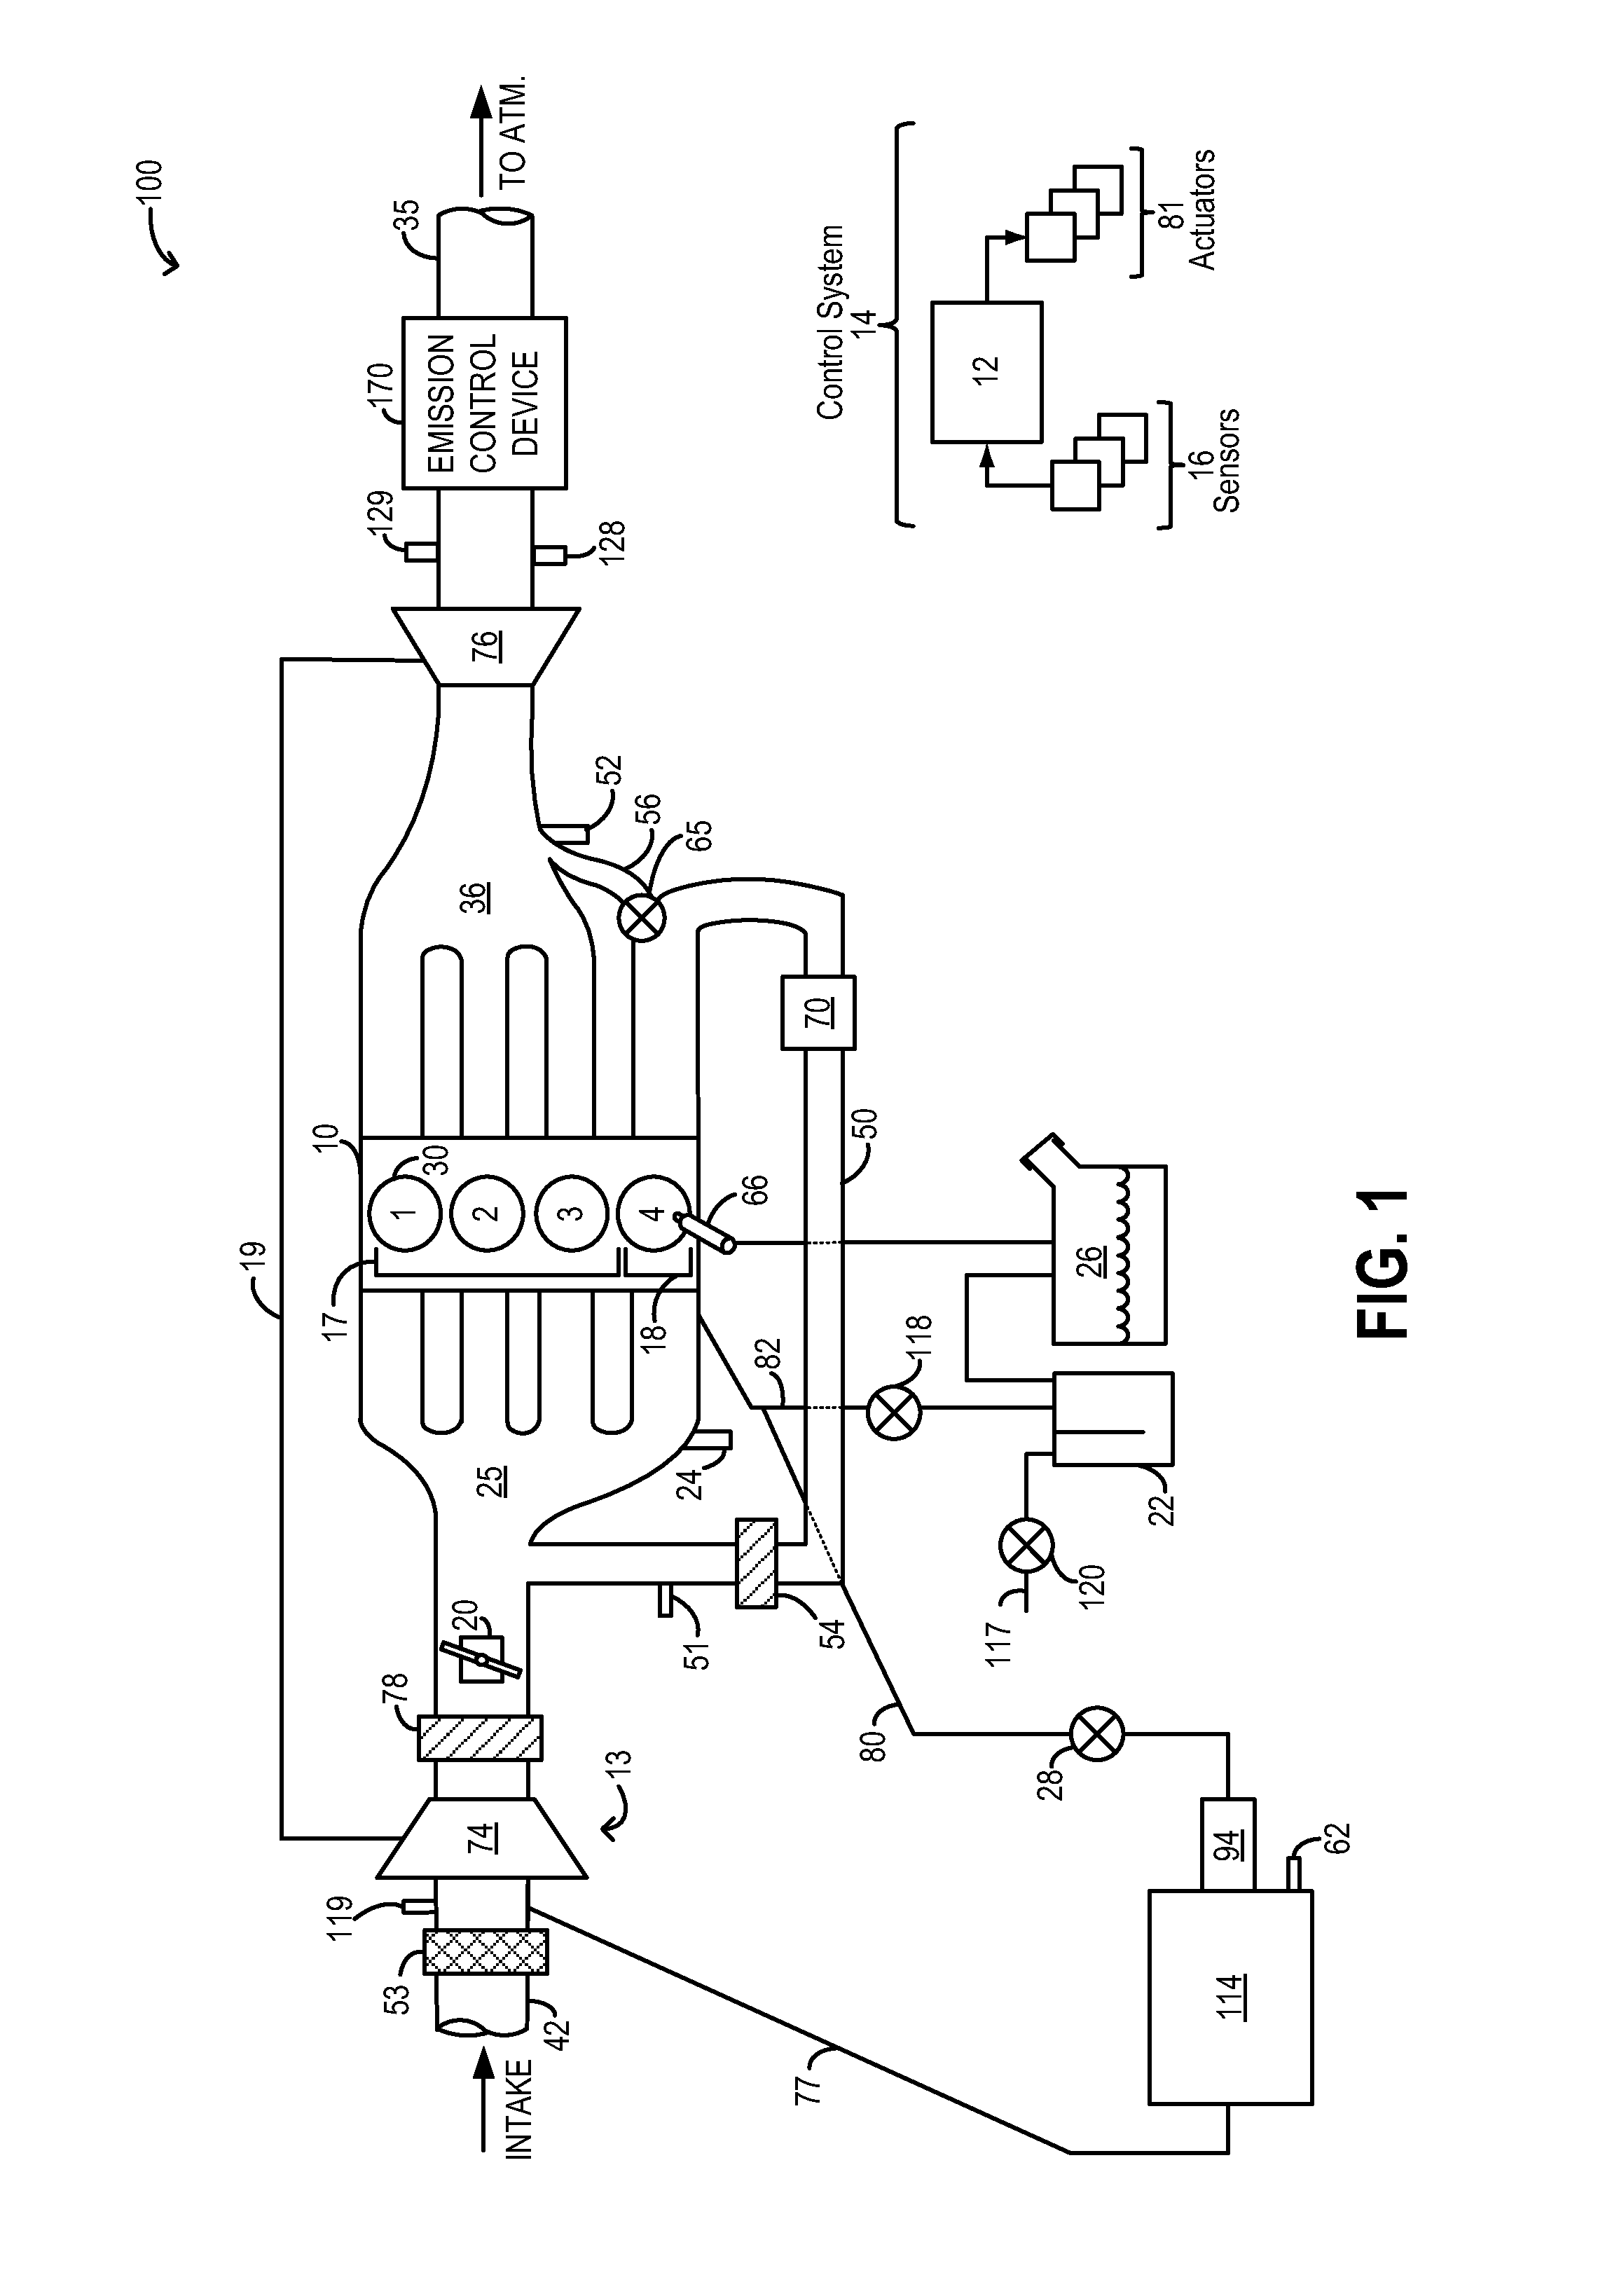 Systems and methods for purge and pcv control